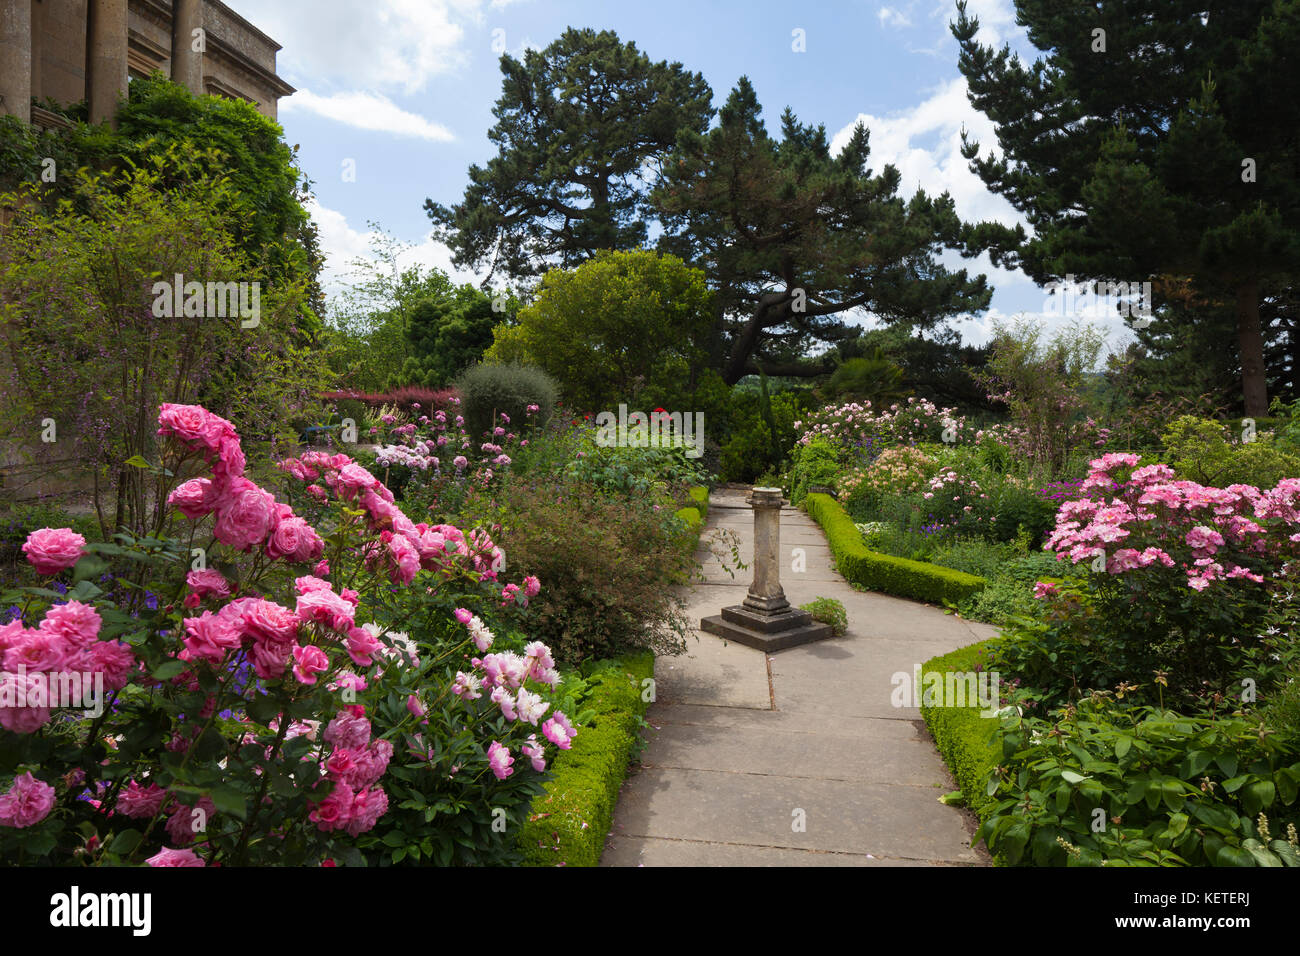 The Four Squares garden and Terrace in June, Kiftsgate Court, Chipping Campden, Cotswolds, Gloucestershire, England Stock Photo